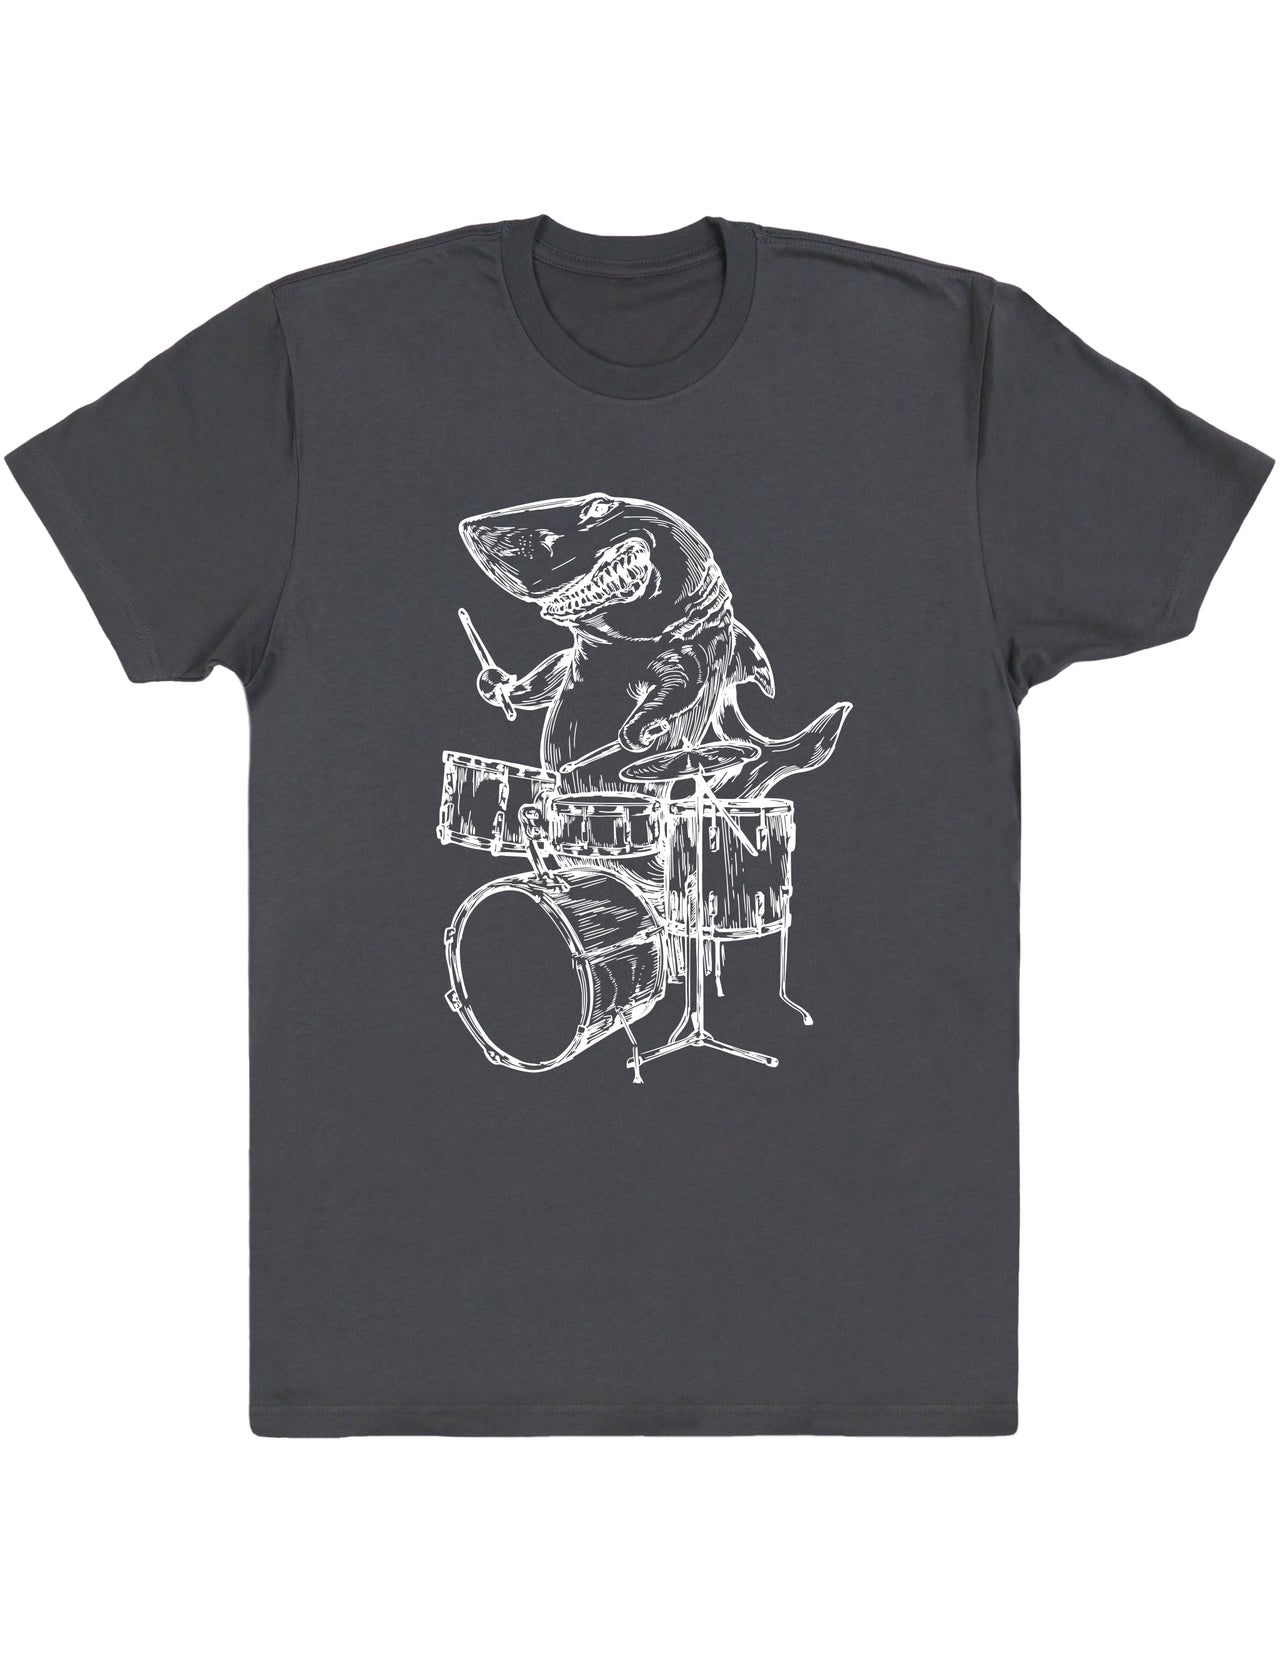 SEEMBO Shark Playing Drums Funny Drummer Musician Music Band Men Cotton T-Shirt